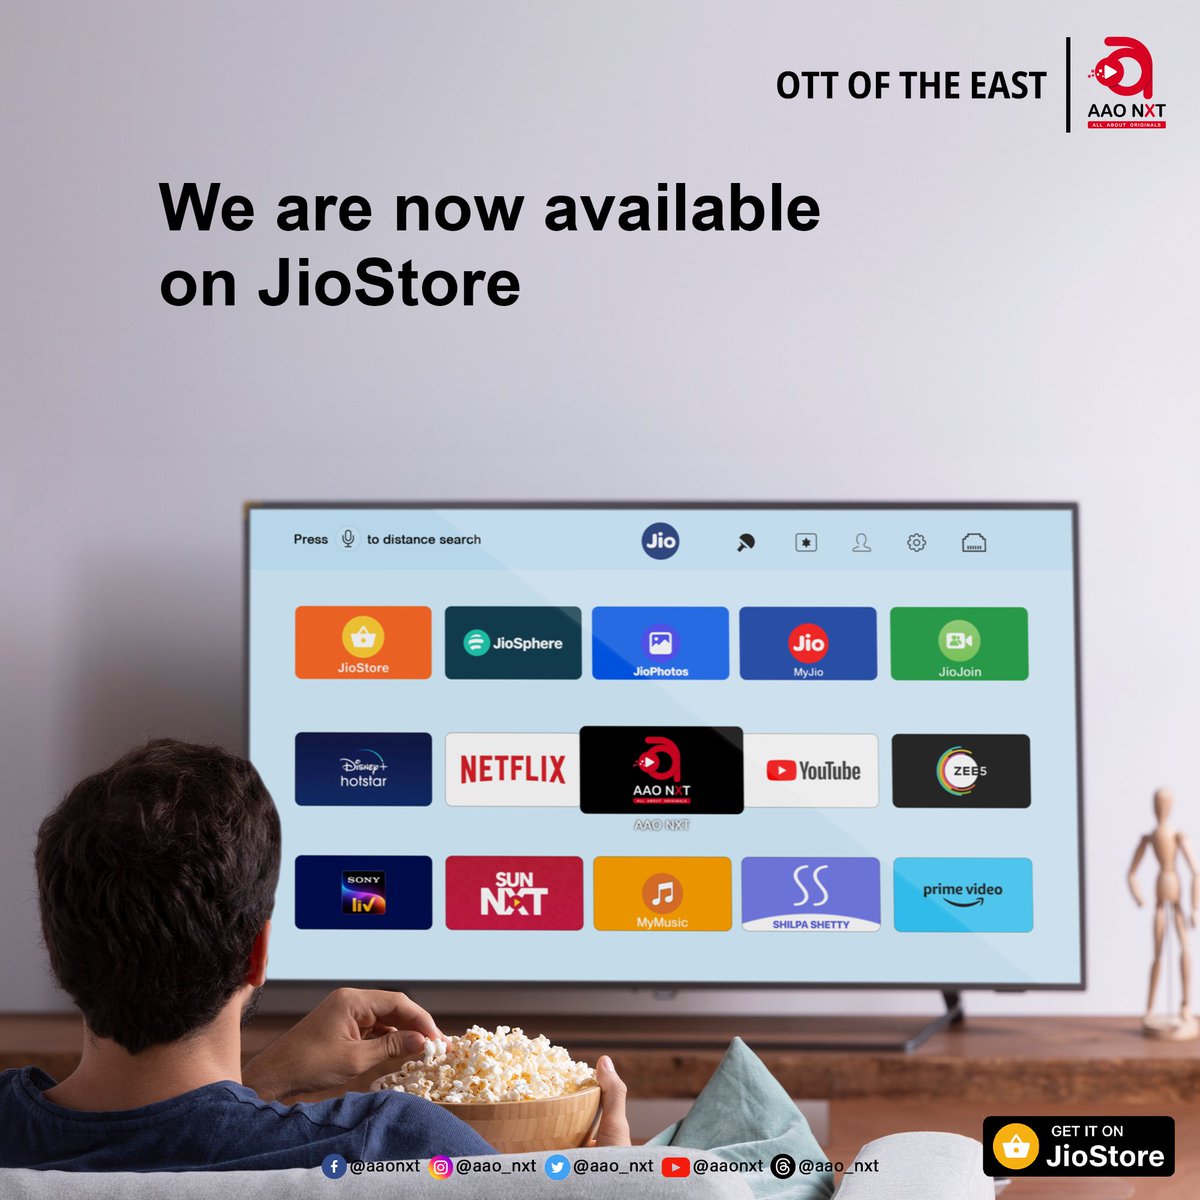 Explore the latest shows, movies, and much more on your JioSTB with AAO NXT, now available on JioStore.
#AAONXT #JioStore